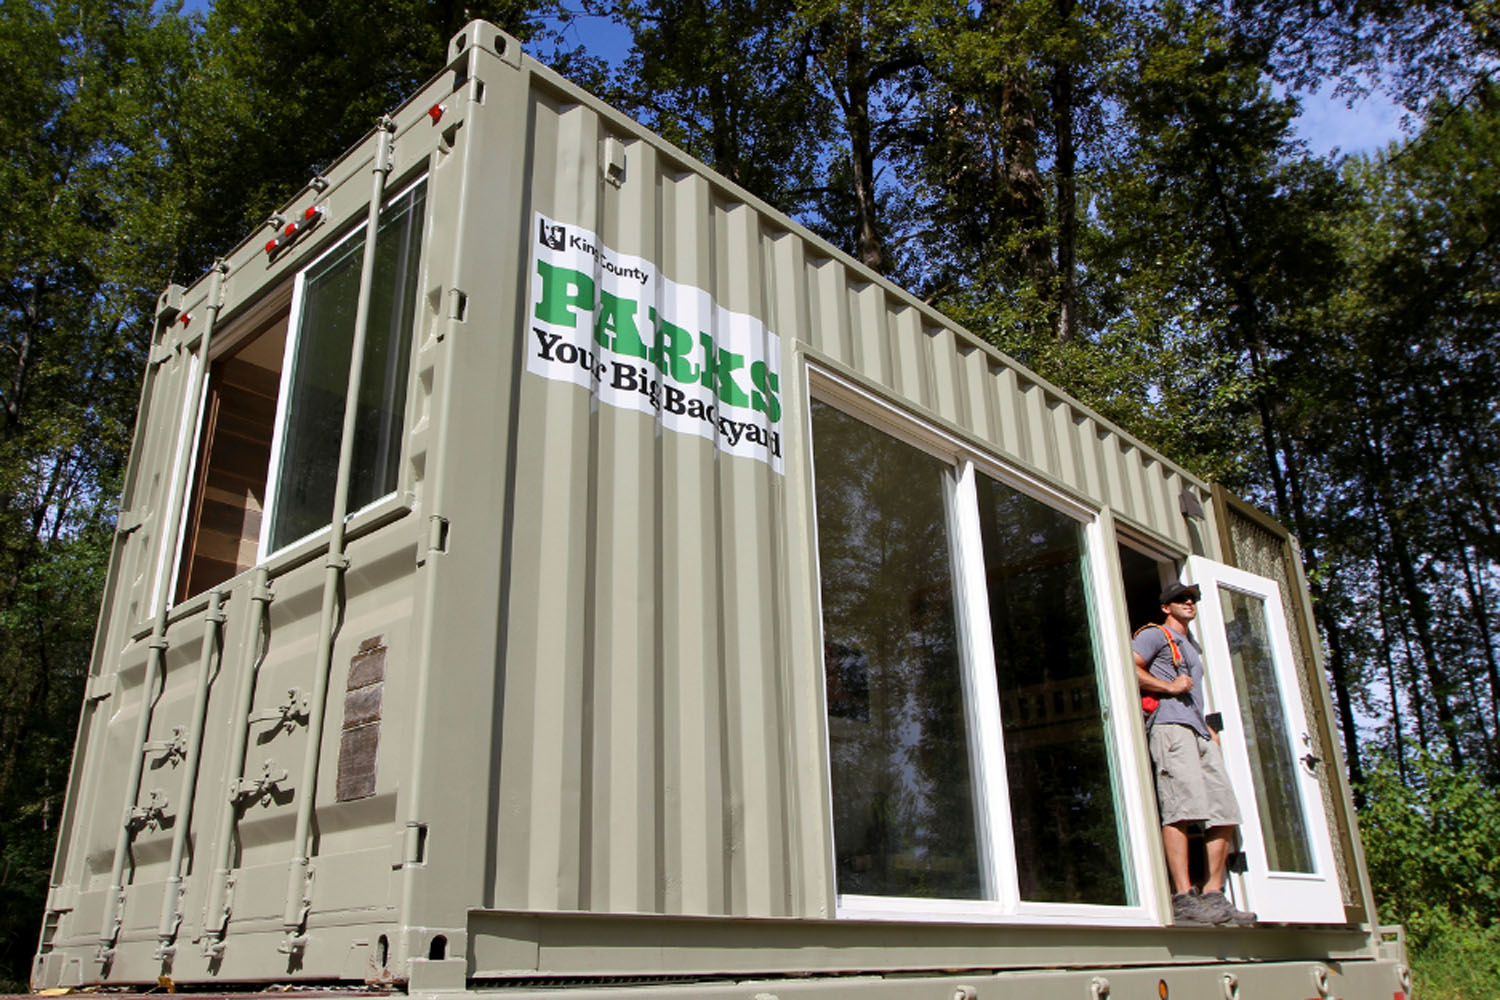 Former cargo container ready for campers - seattlepi.com